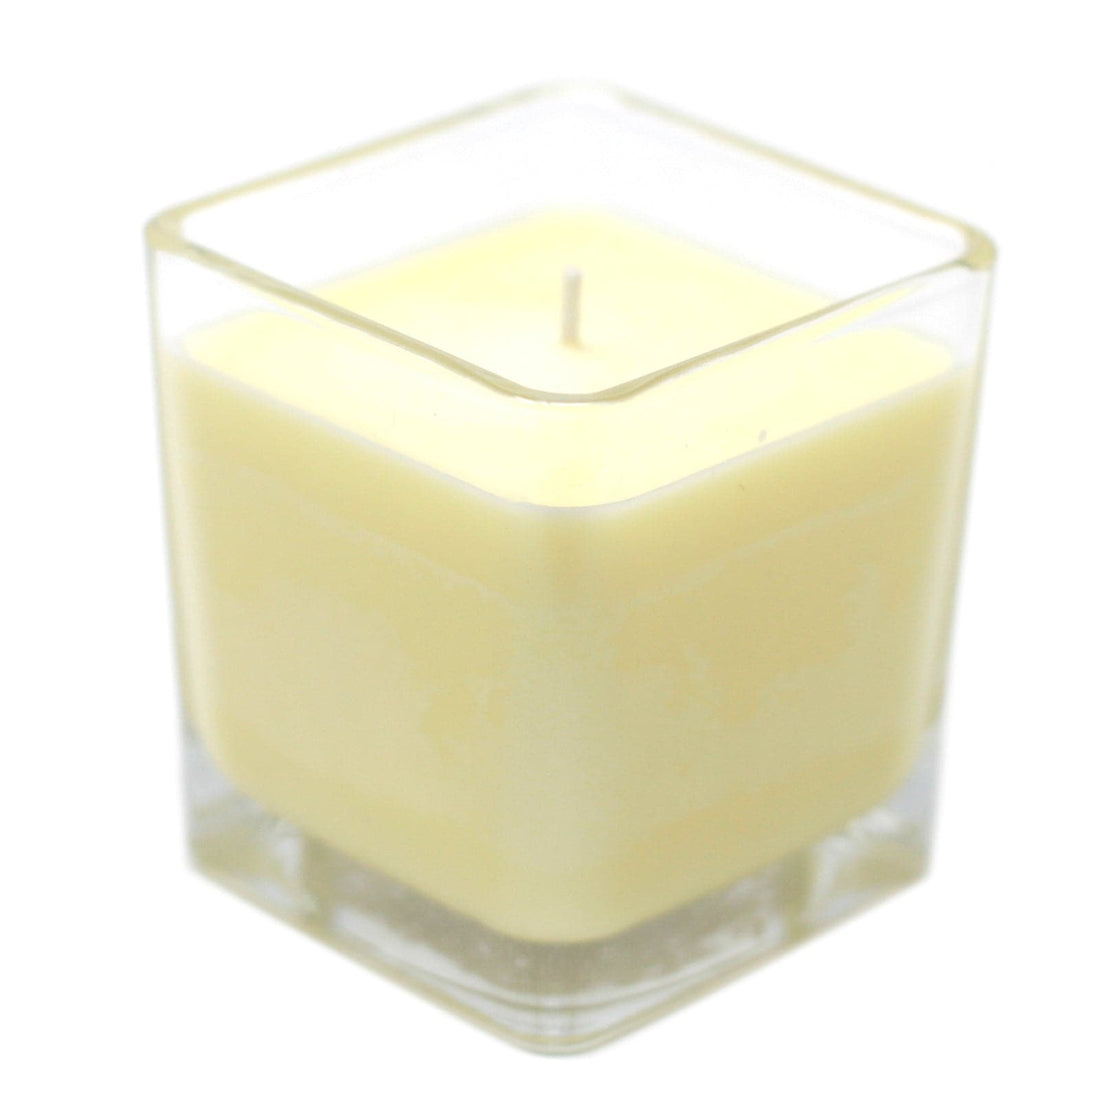 White Label Soy Wax Jar Candle - Home Bakery - best price from Maltashopper.com WLSOYC-10